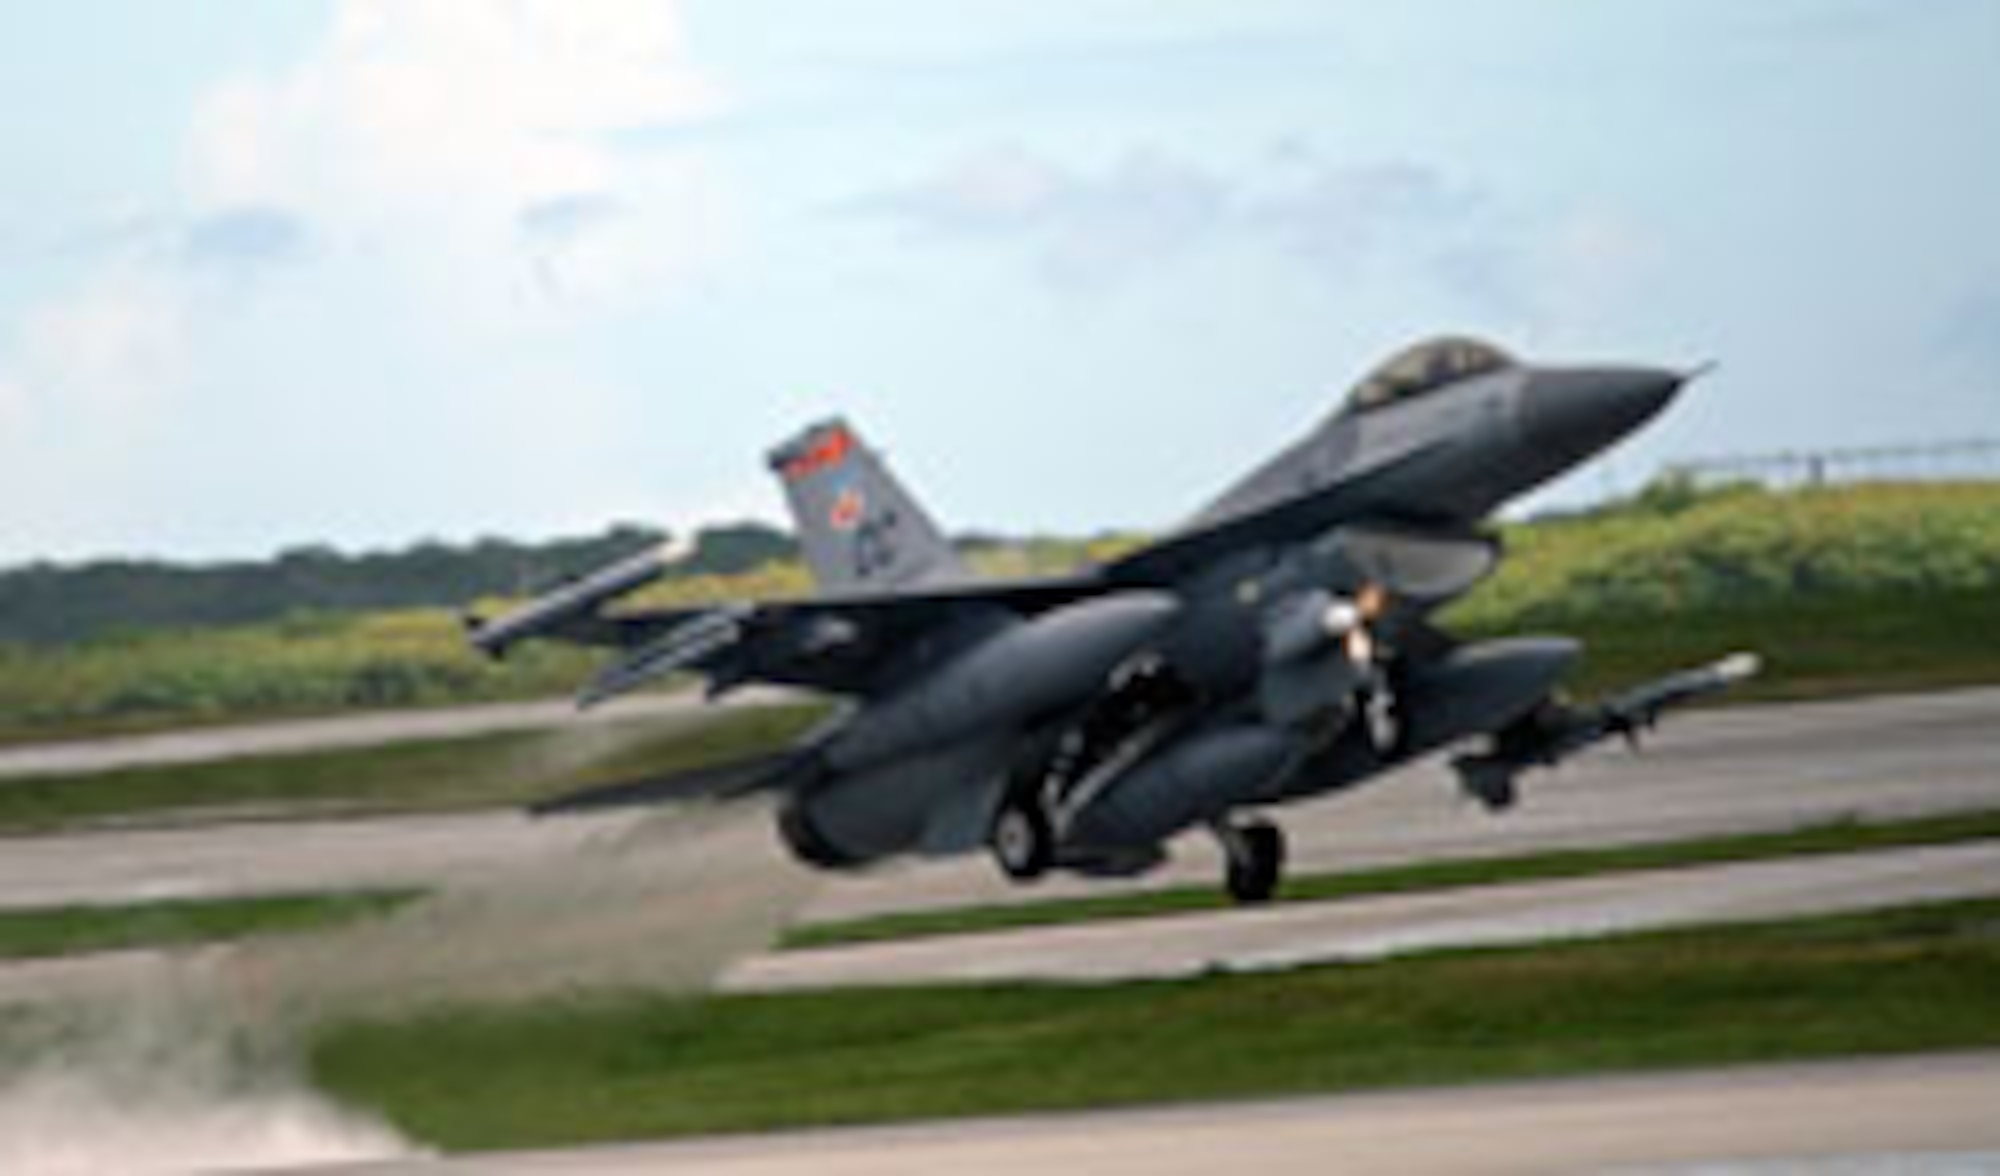 ANDERSEN AIR FORCE BASE, Guam -- An F-16 from the 522d Expeditionary Fighter Squadron takes off during a routine training mission. The current deployment of aircraft at Guam is one of the largest footprints in the history of the buildup of air forces here, maintaining U.S. deterrence and warfighting capabilities against possible threats in Asia. (U.S. Air Force photo by Senior Master Sgt. Mahmoud Rasoulyan)